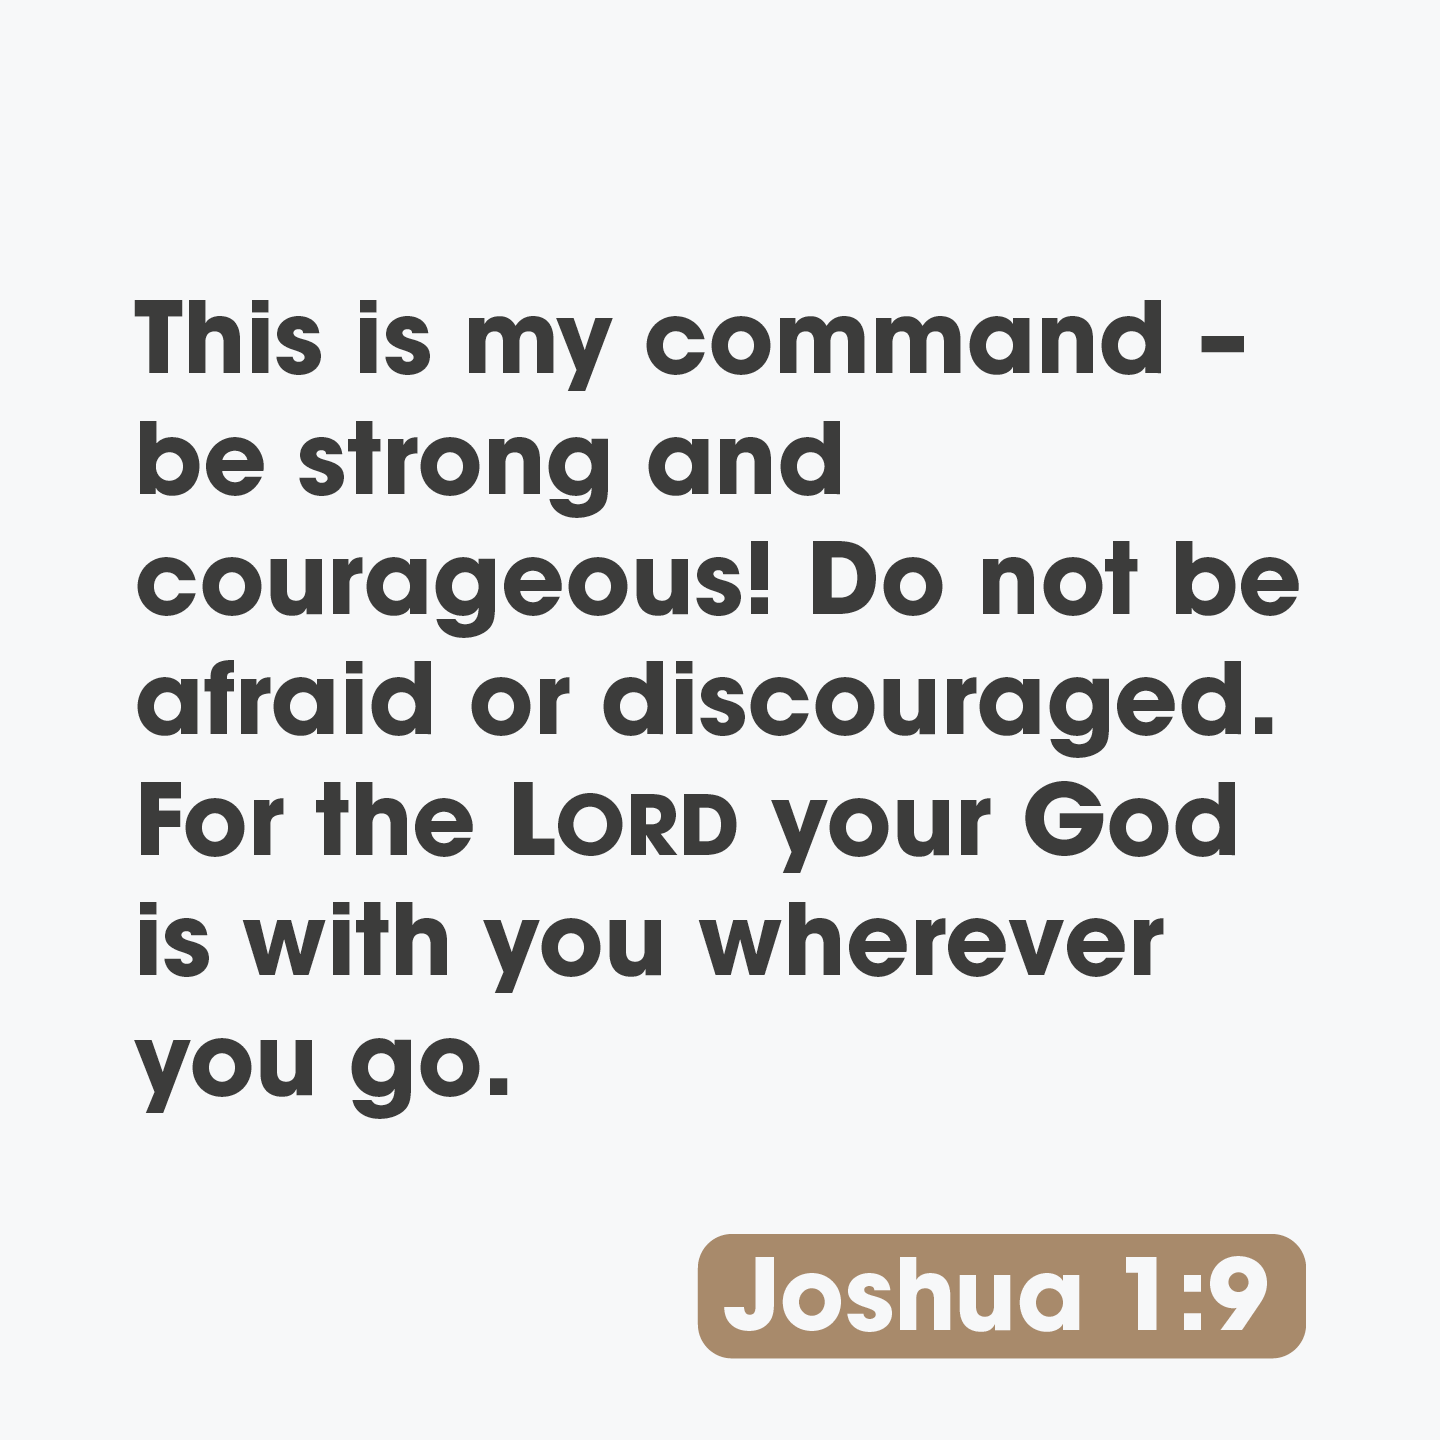 This is command be strong and courageous! Do not be afraid or discouraged: For the LORD your God is with you wherever you go. Joshua 1.9 my